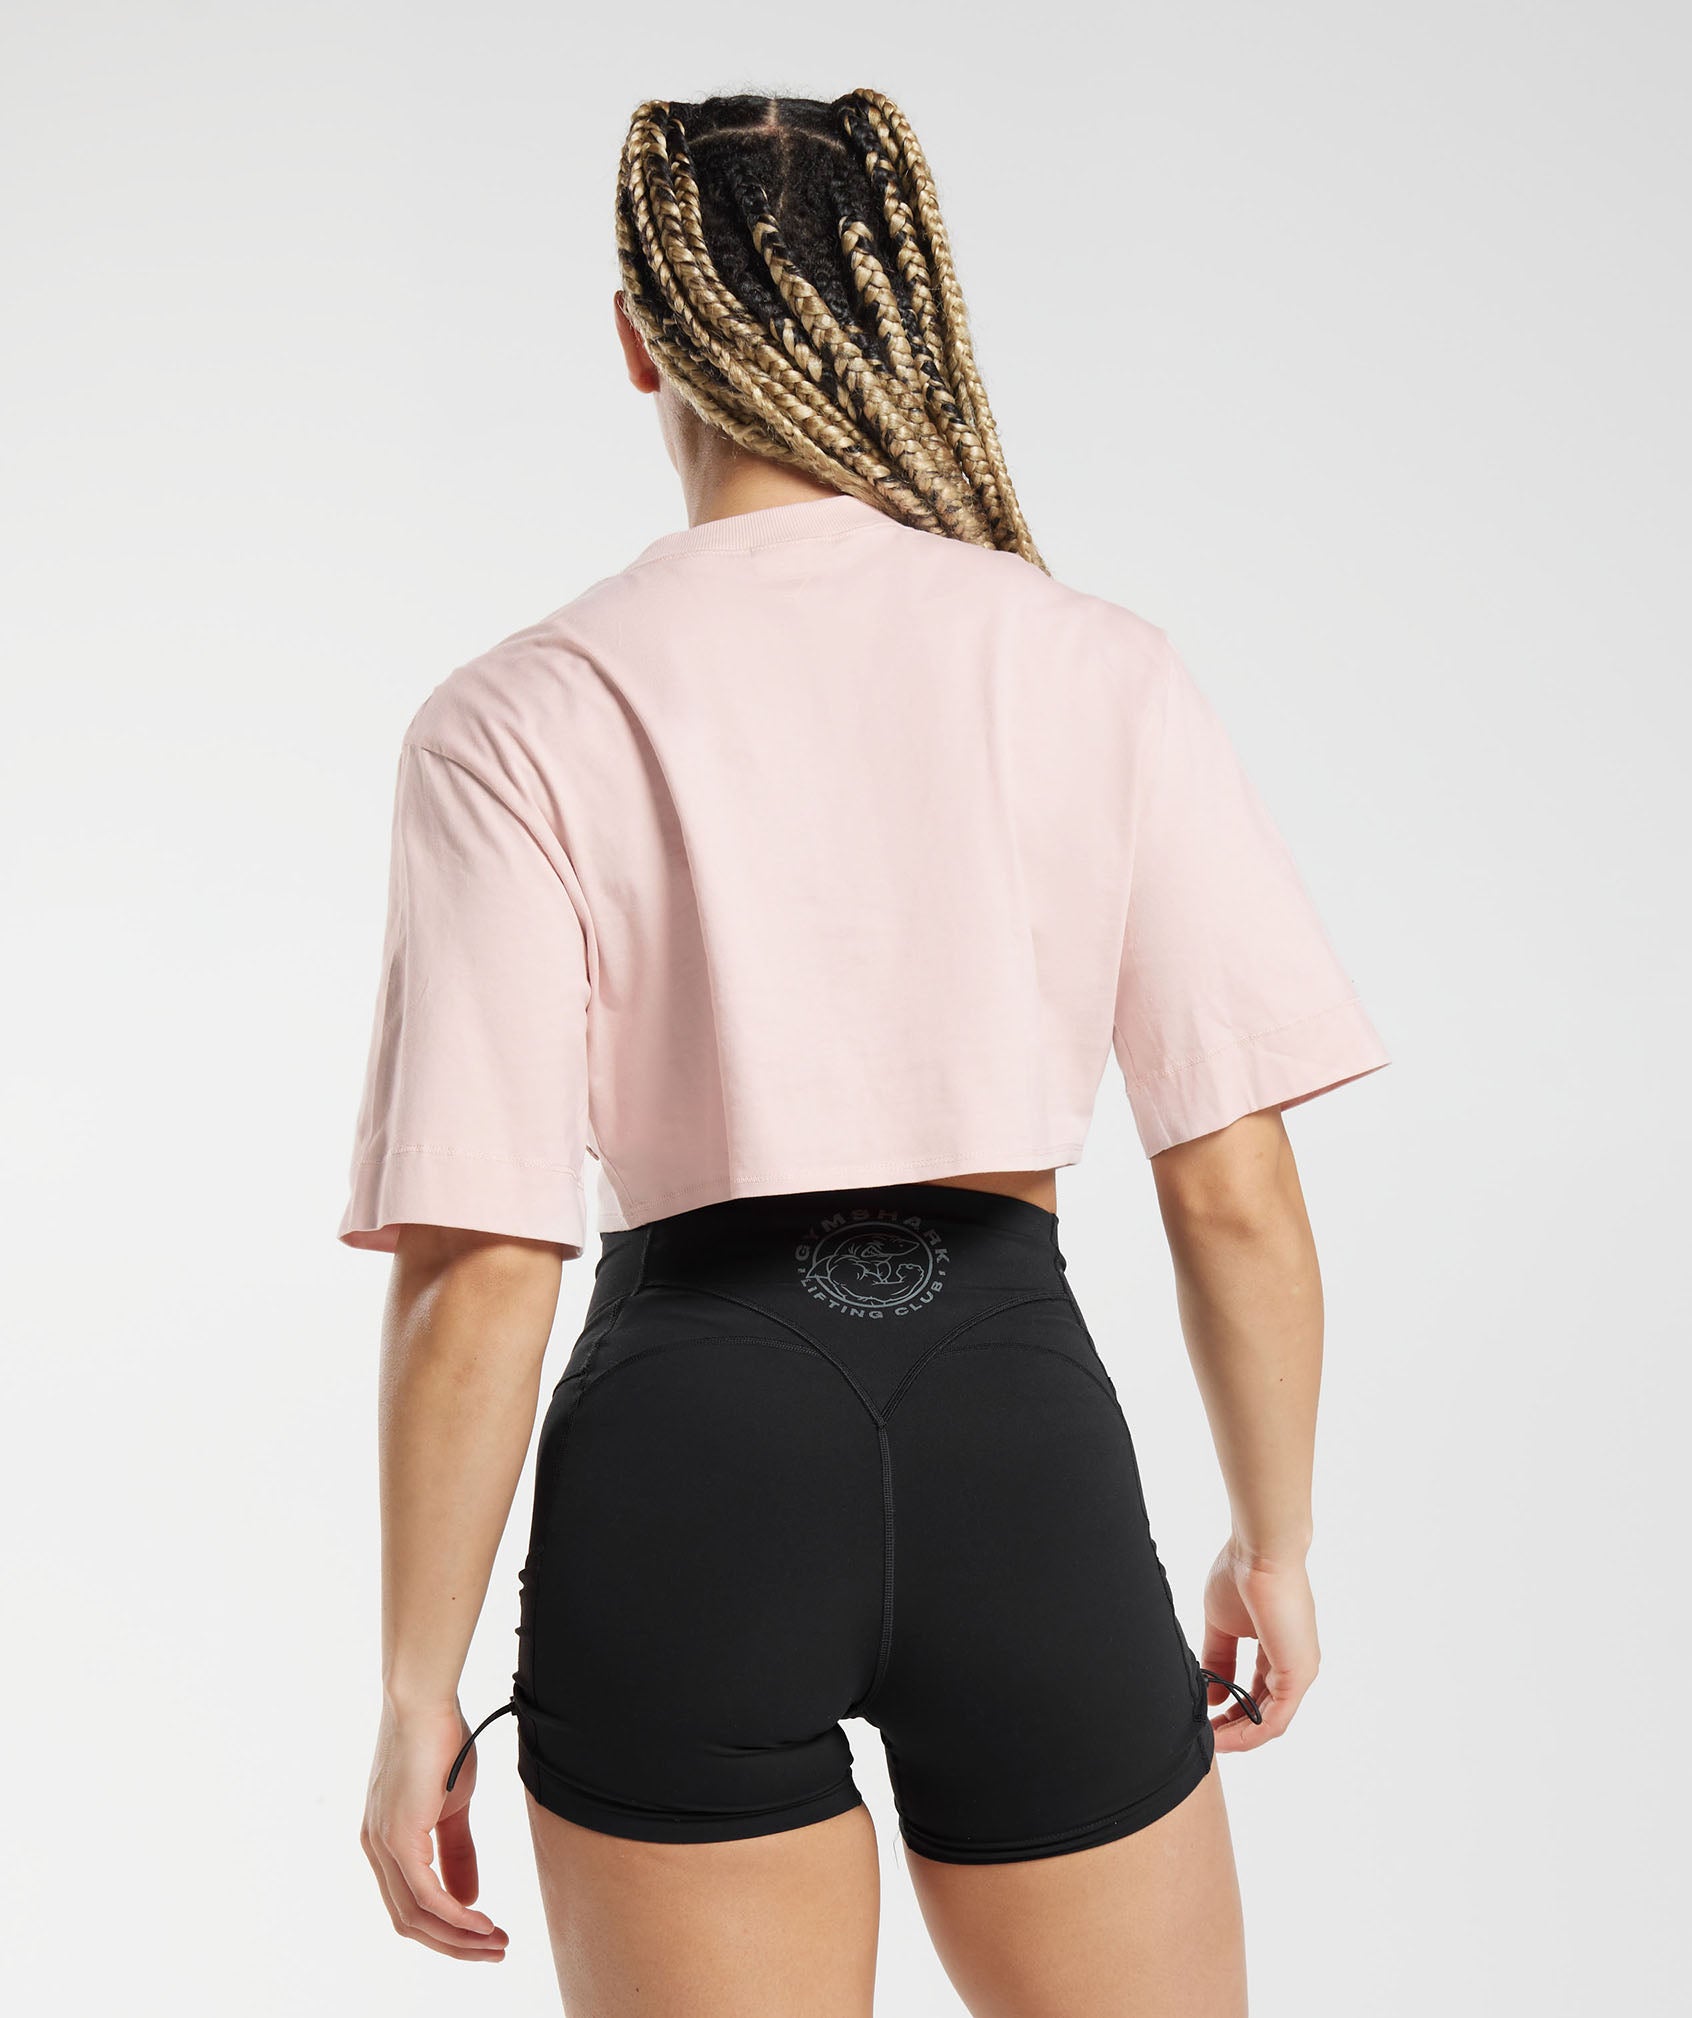 Cotton Boxy Crop Top in Misty Pink